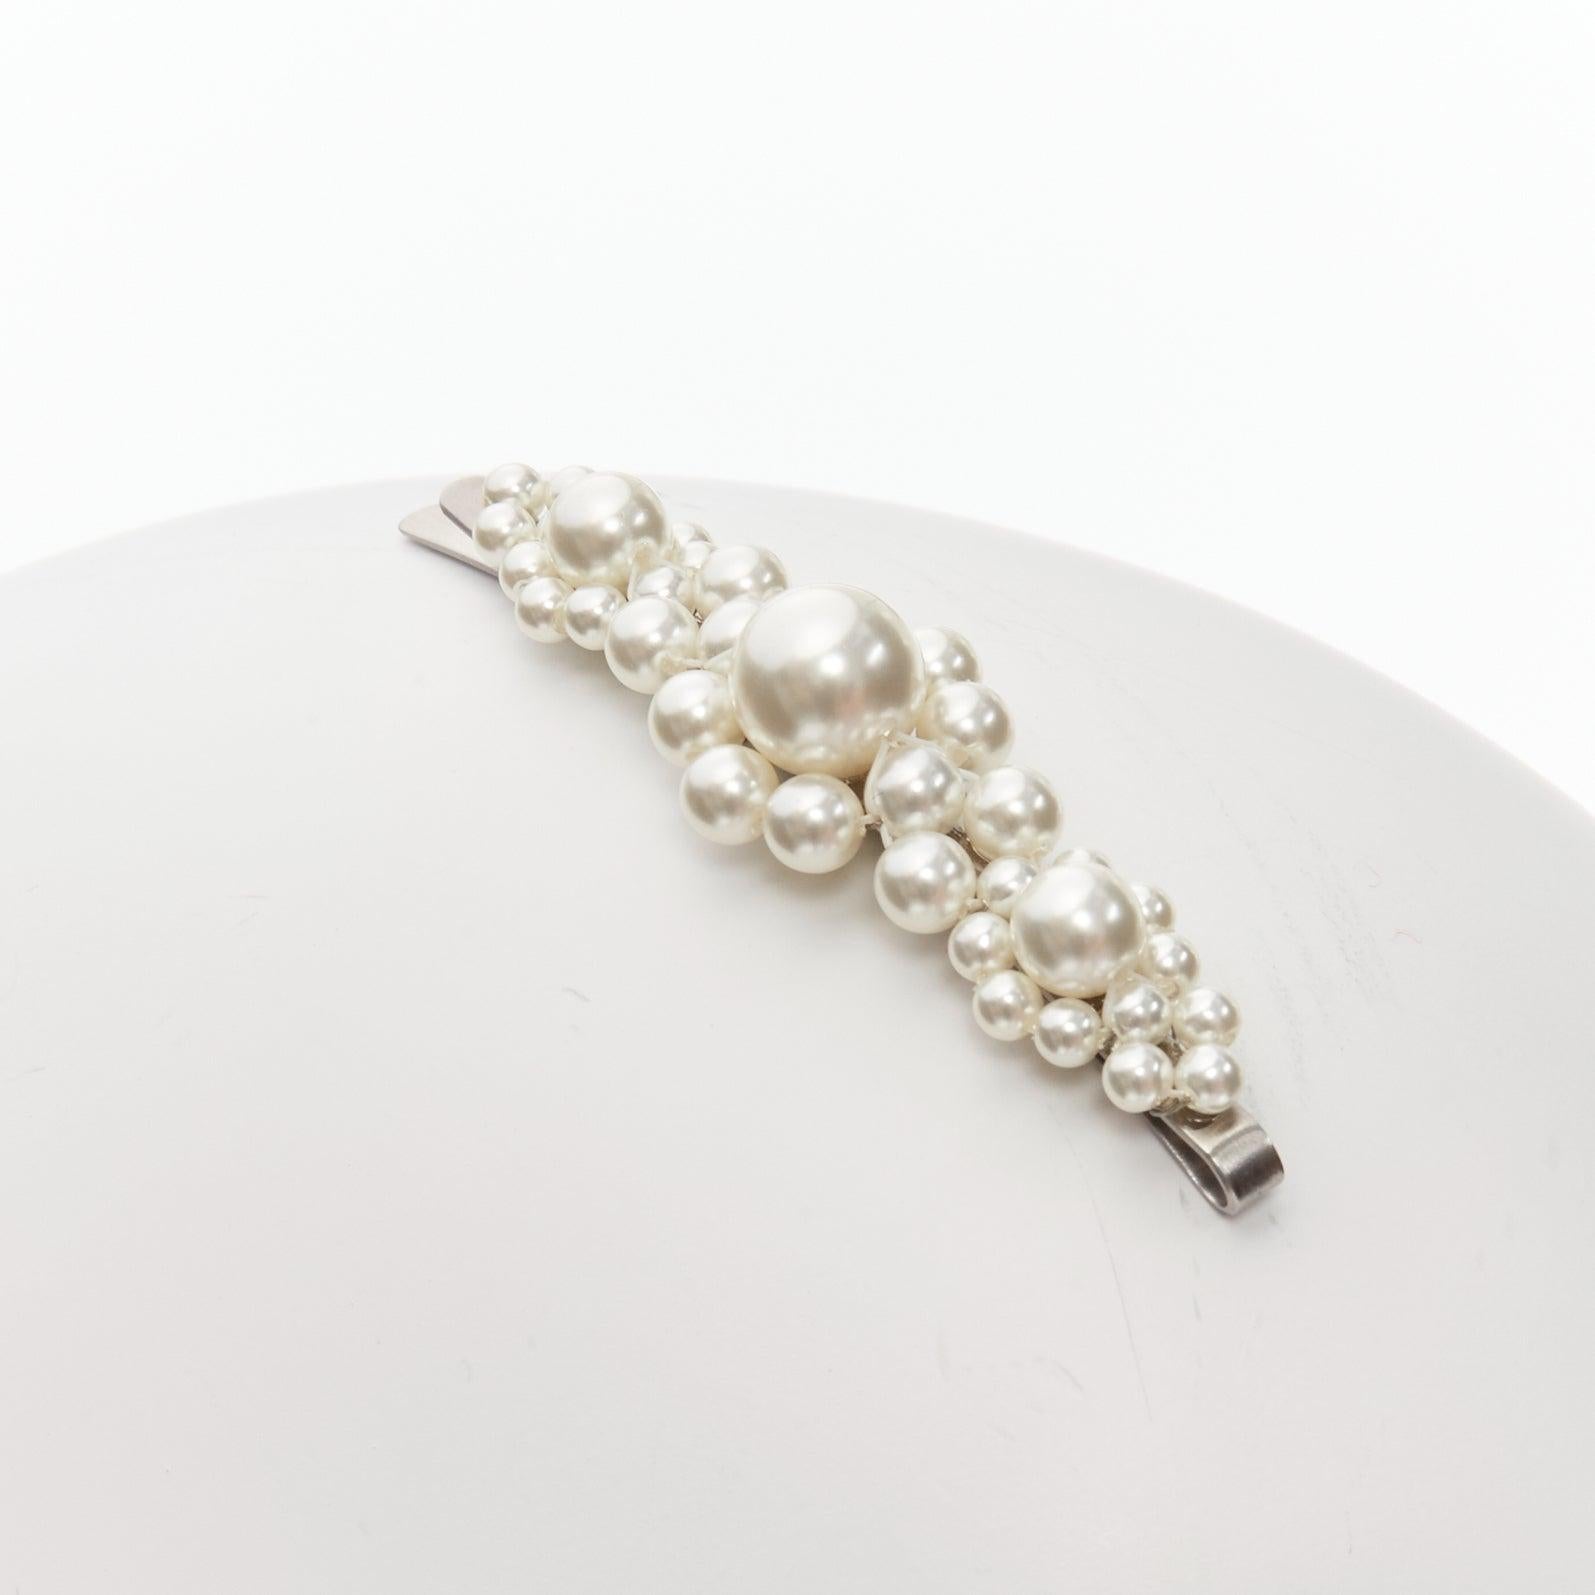 SIMONE ROCHA faux pearl embellished silver hair clip Single
Reference: LNKO/A02226
Brand: Simone Rocha
Material: Metal, Faux Pearl
Color: Pearl, Silver
Pattern: Solid
Closure: Clip On
Lining: Silver Metal

CONDITION:
Condition: Unworn in mint